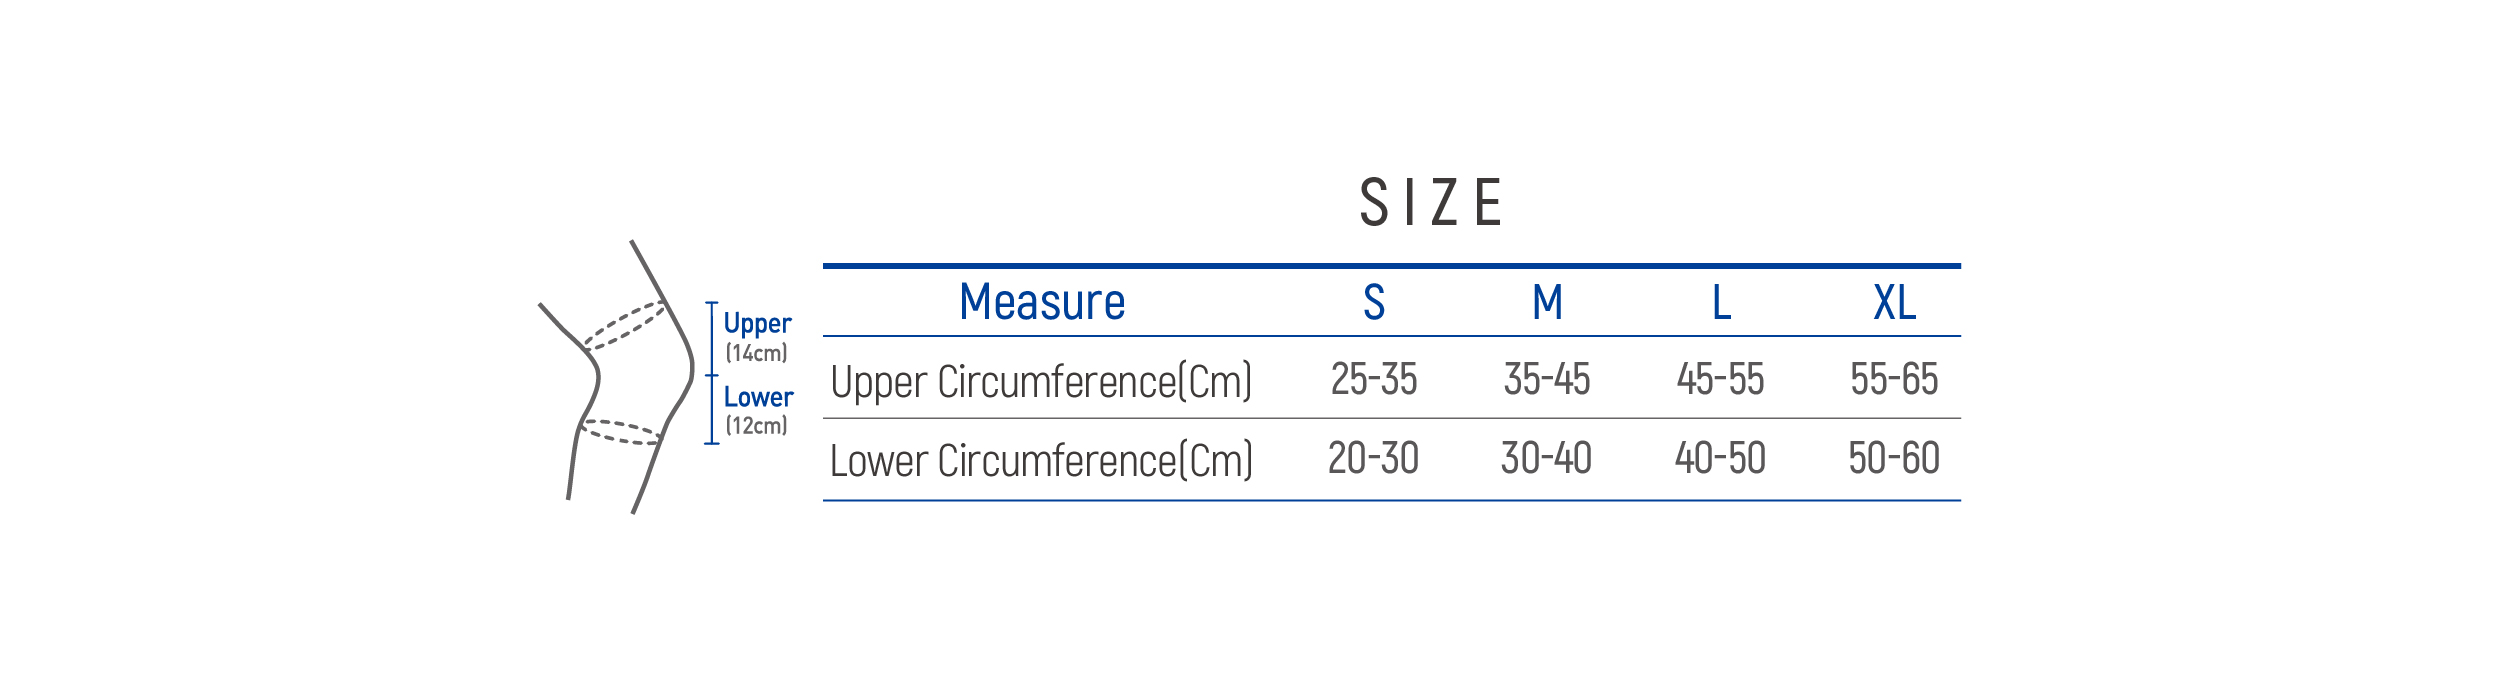 DR-K019 Size table image